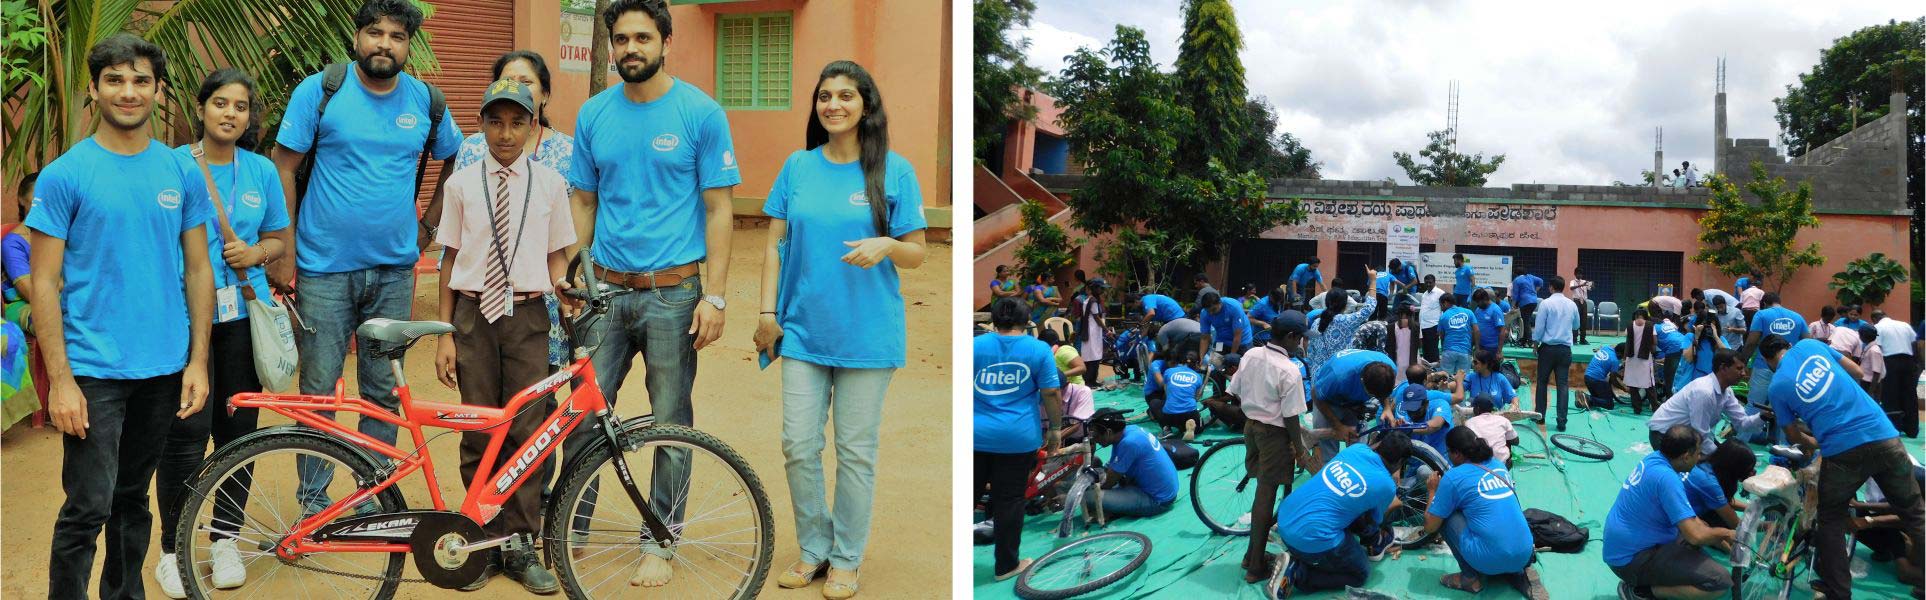 Intel employees build bicycles to bring school closer to Smile kids